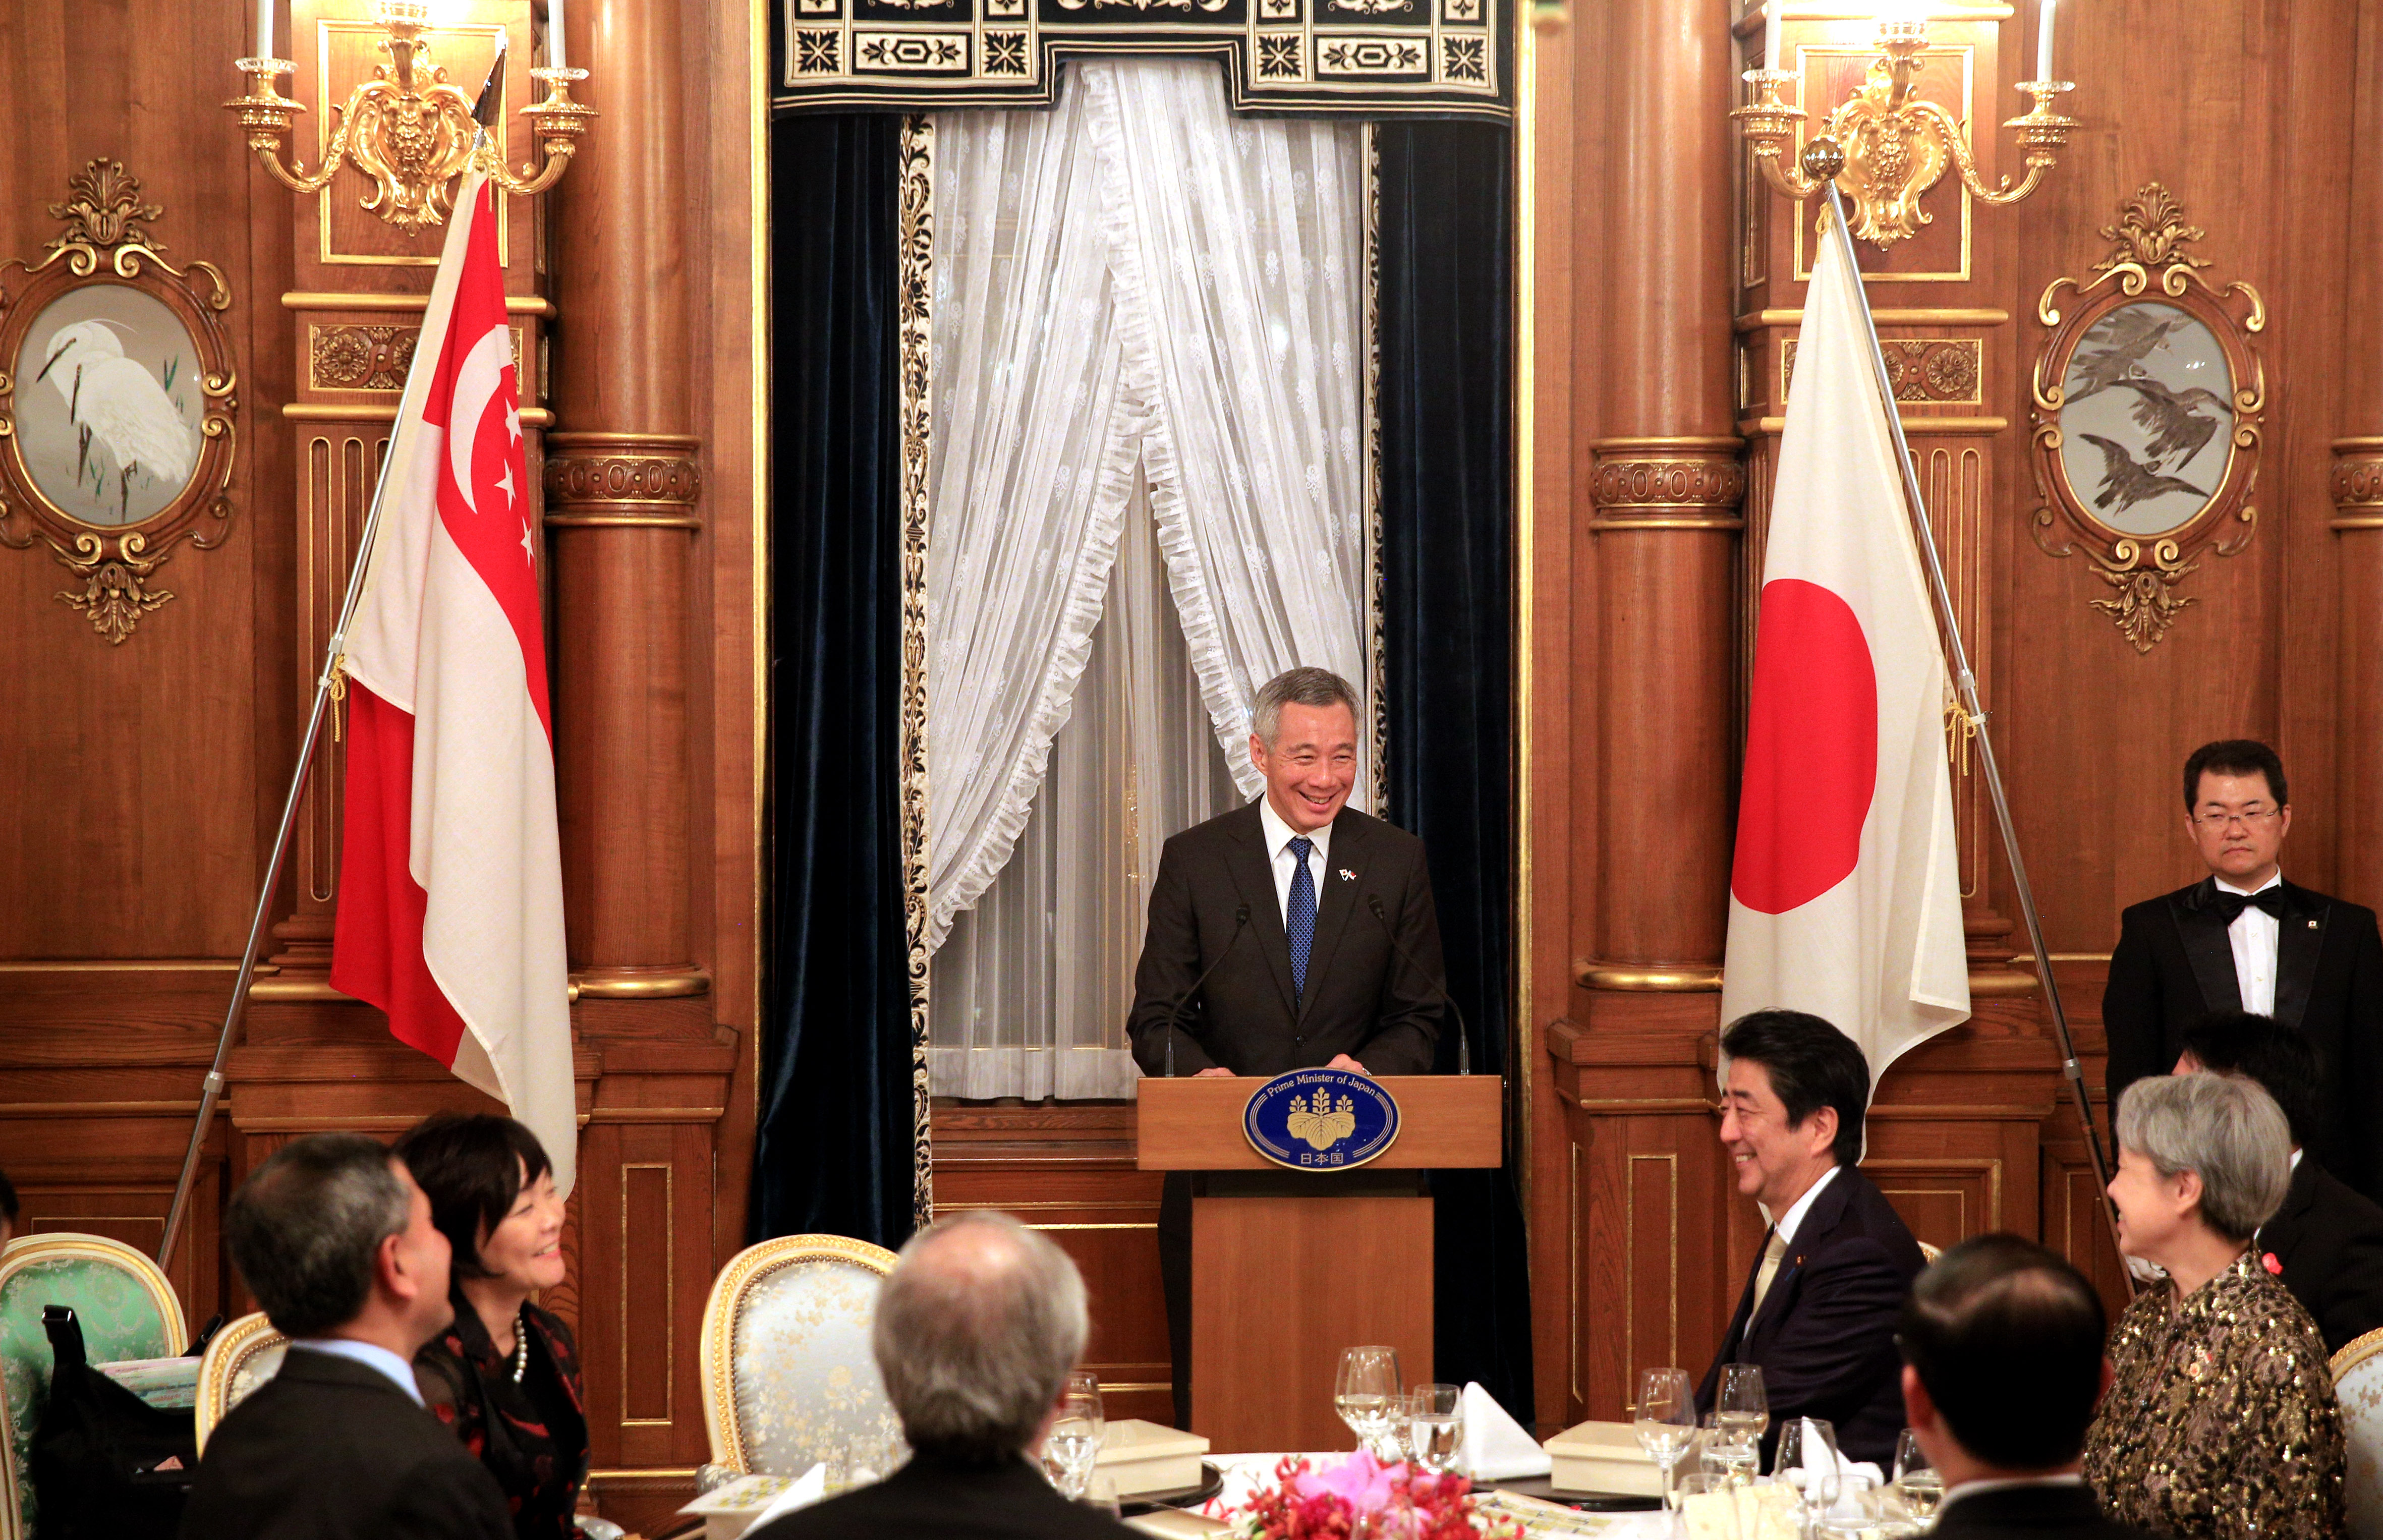 PM Lee Hsien Loong's Toast Speech at the Akasaka State Guest House in Tokyo, Japan